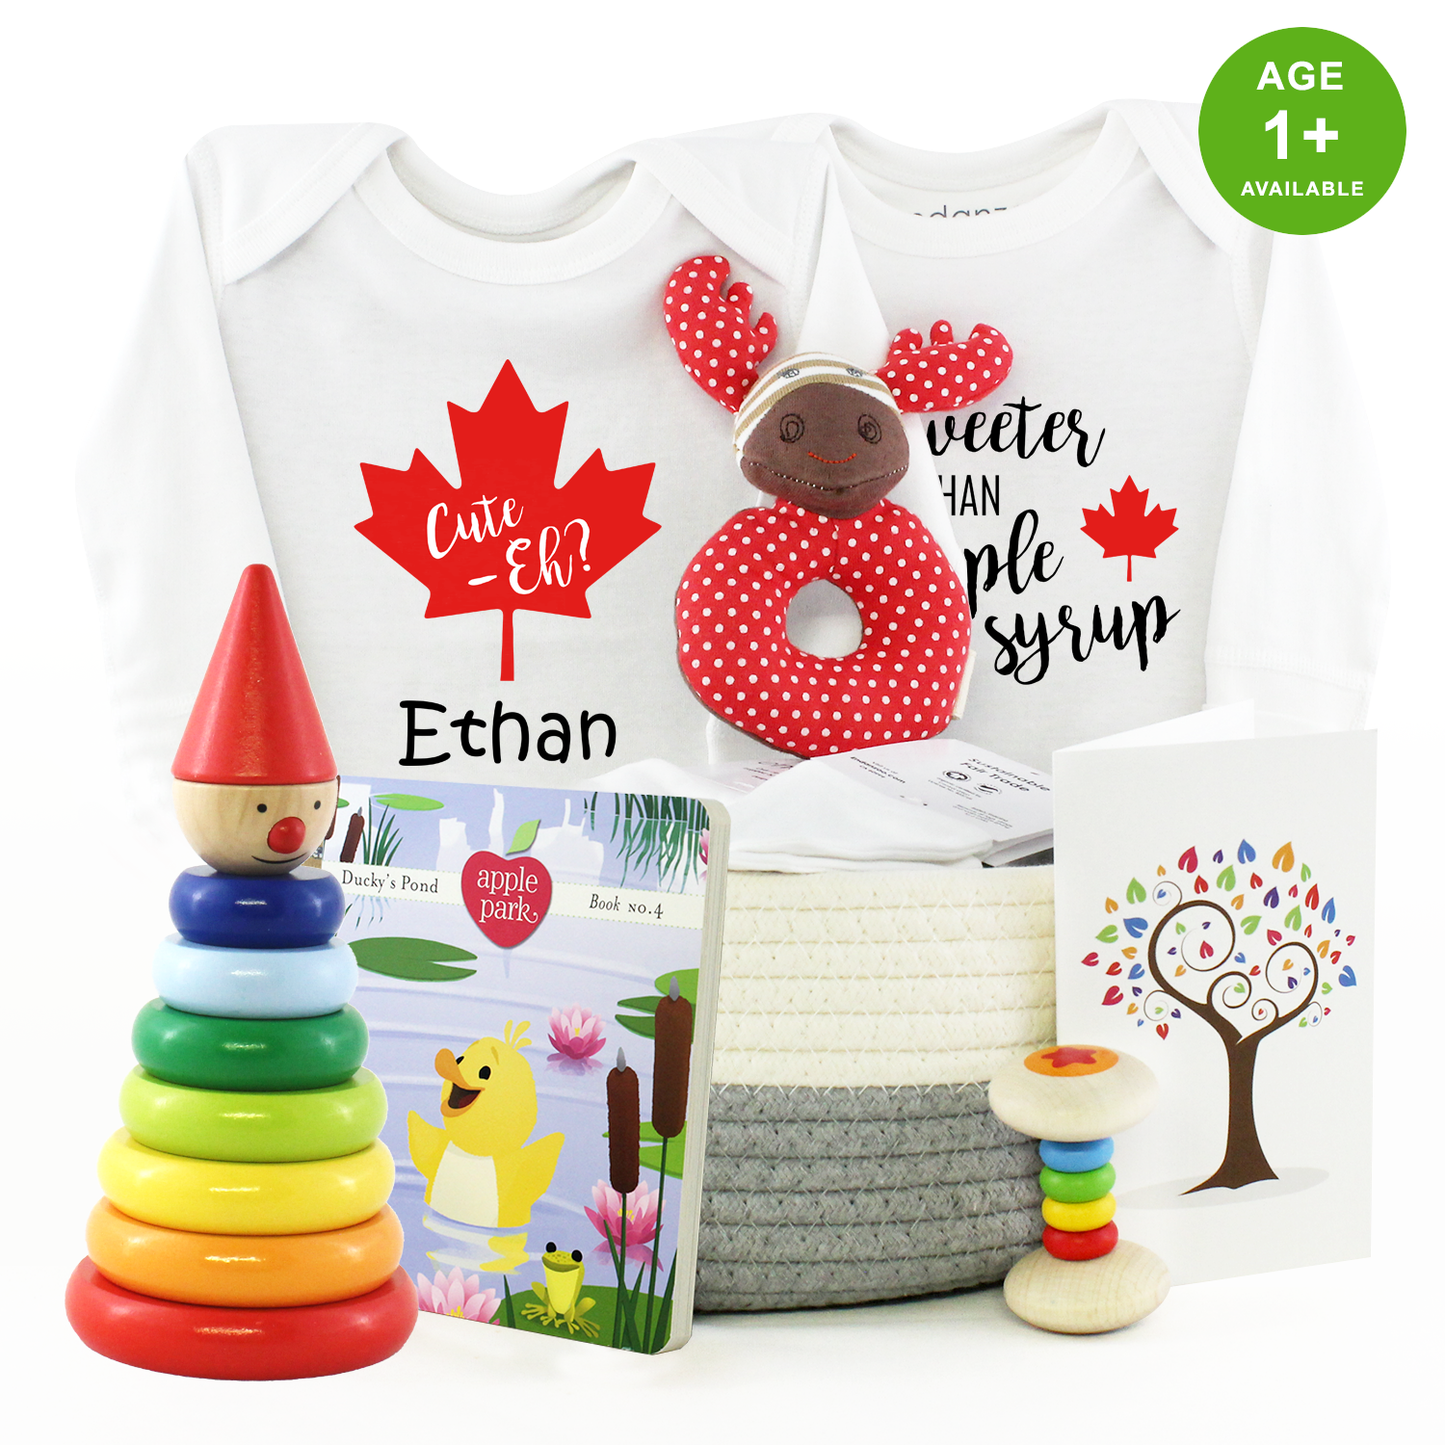 Zeronto Baby Gift Basket - Sweeter Than Maple Syrup (Canada)